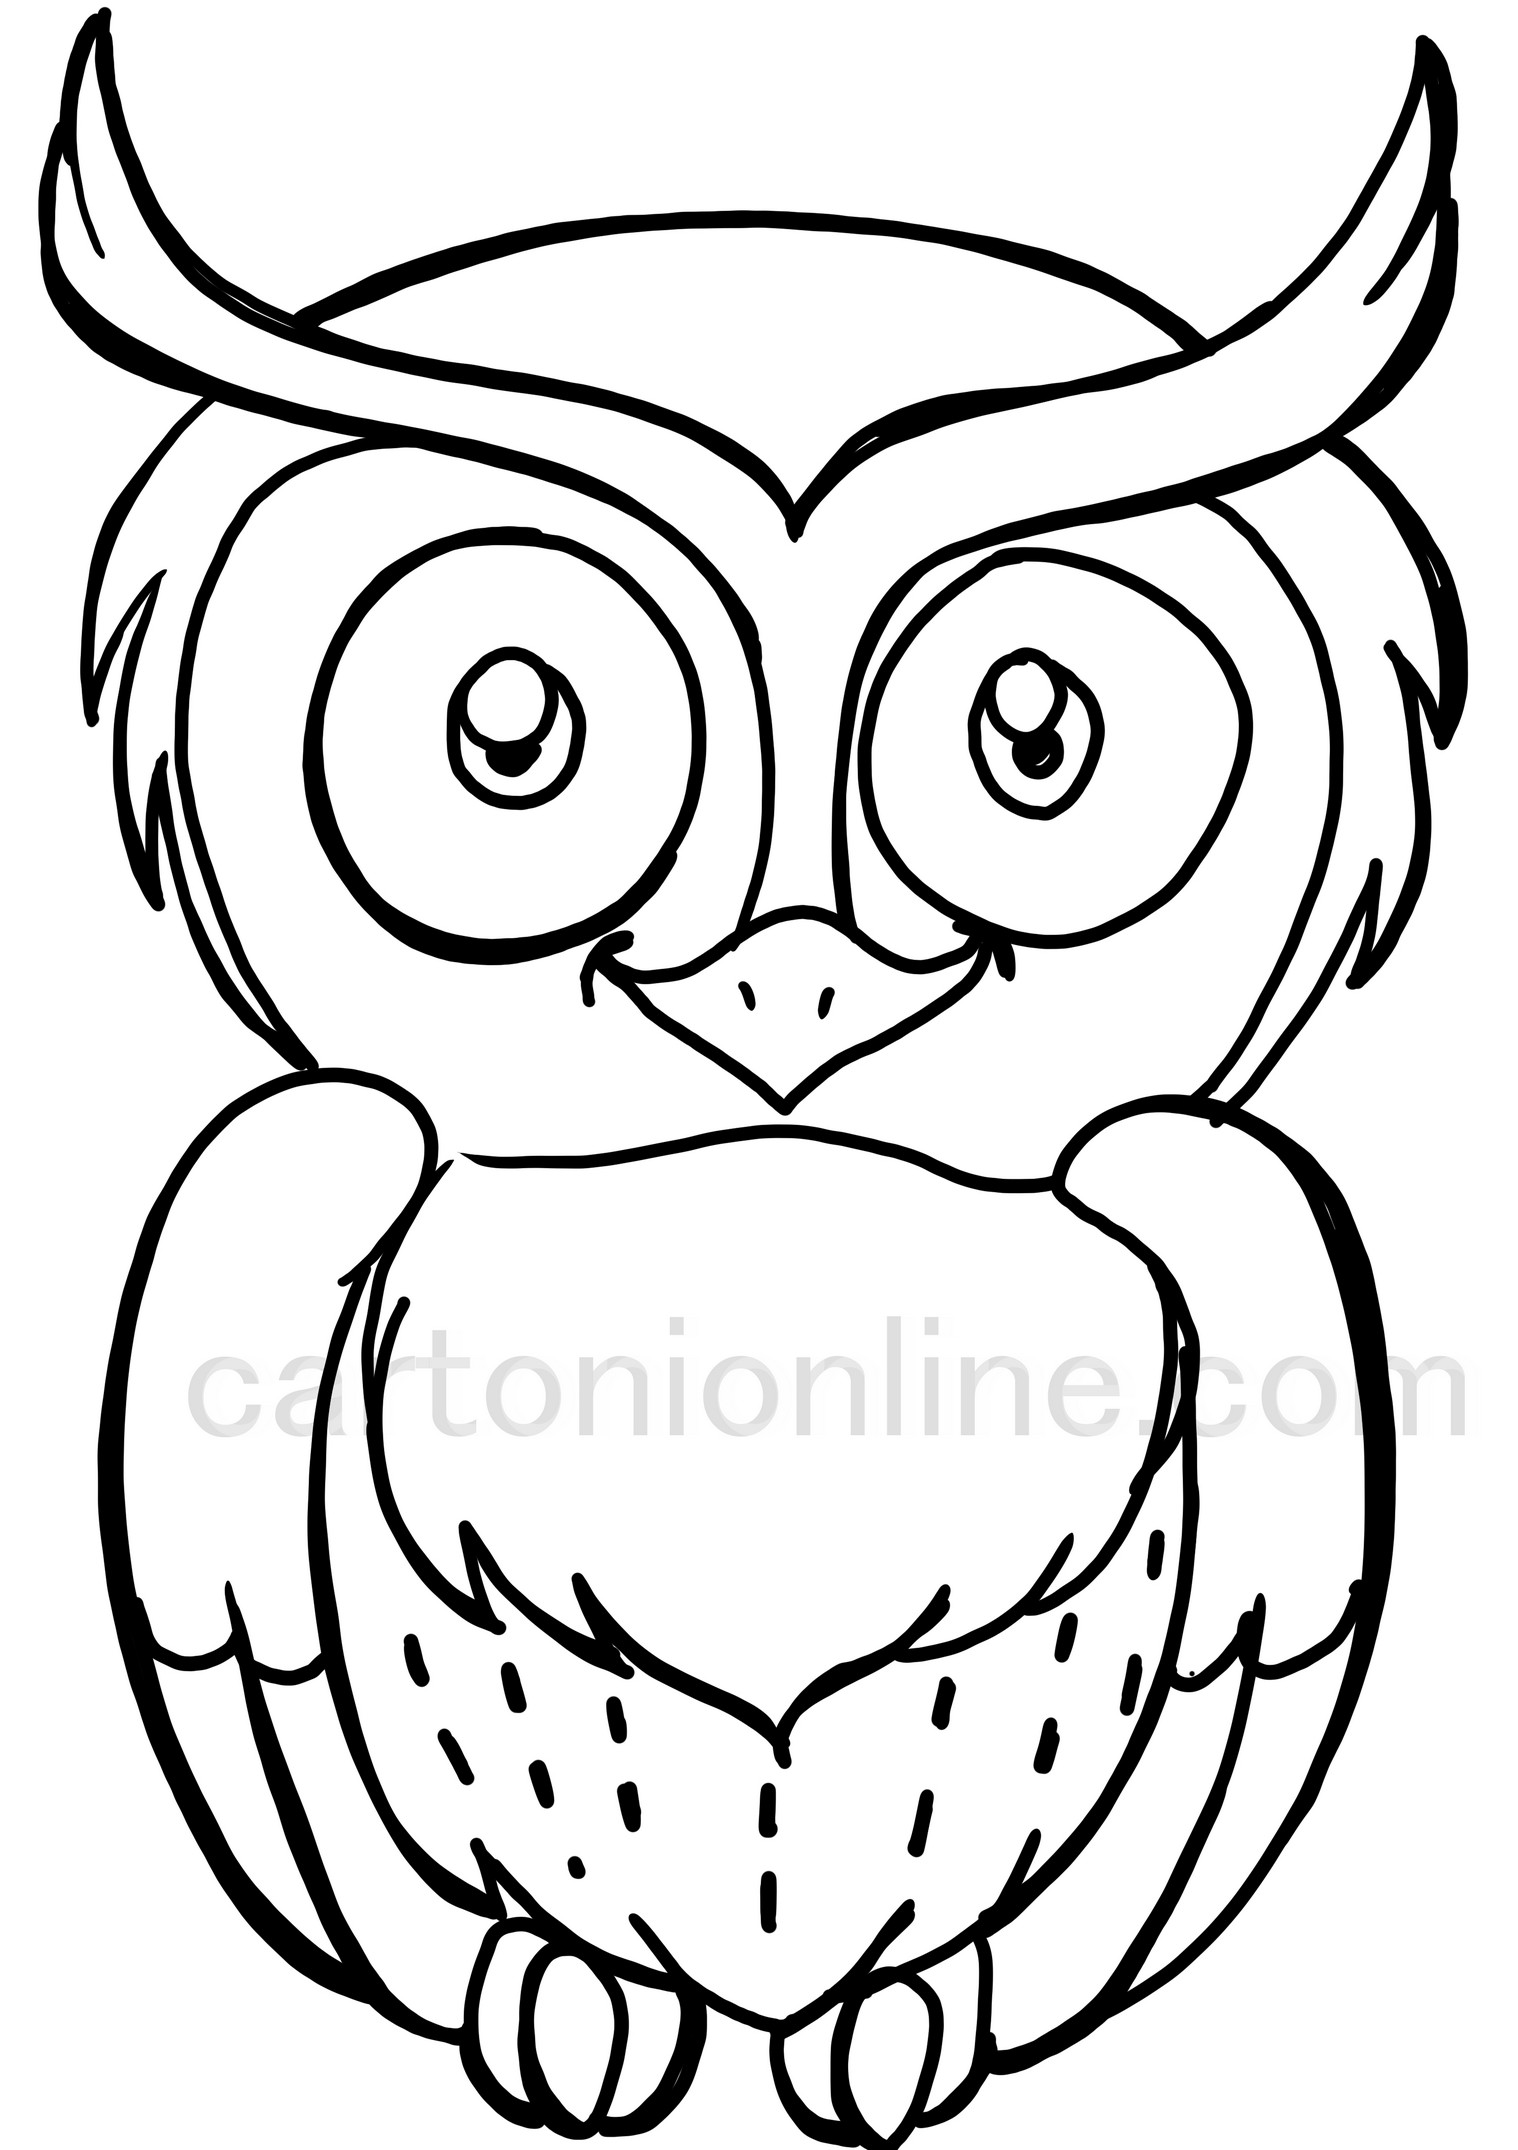 Cartoon style owl coloring page